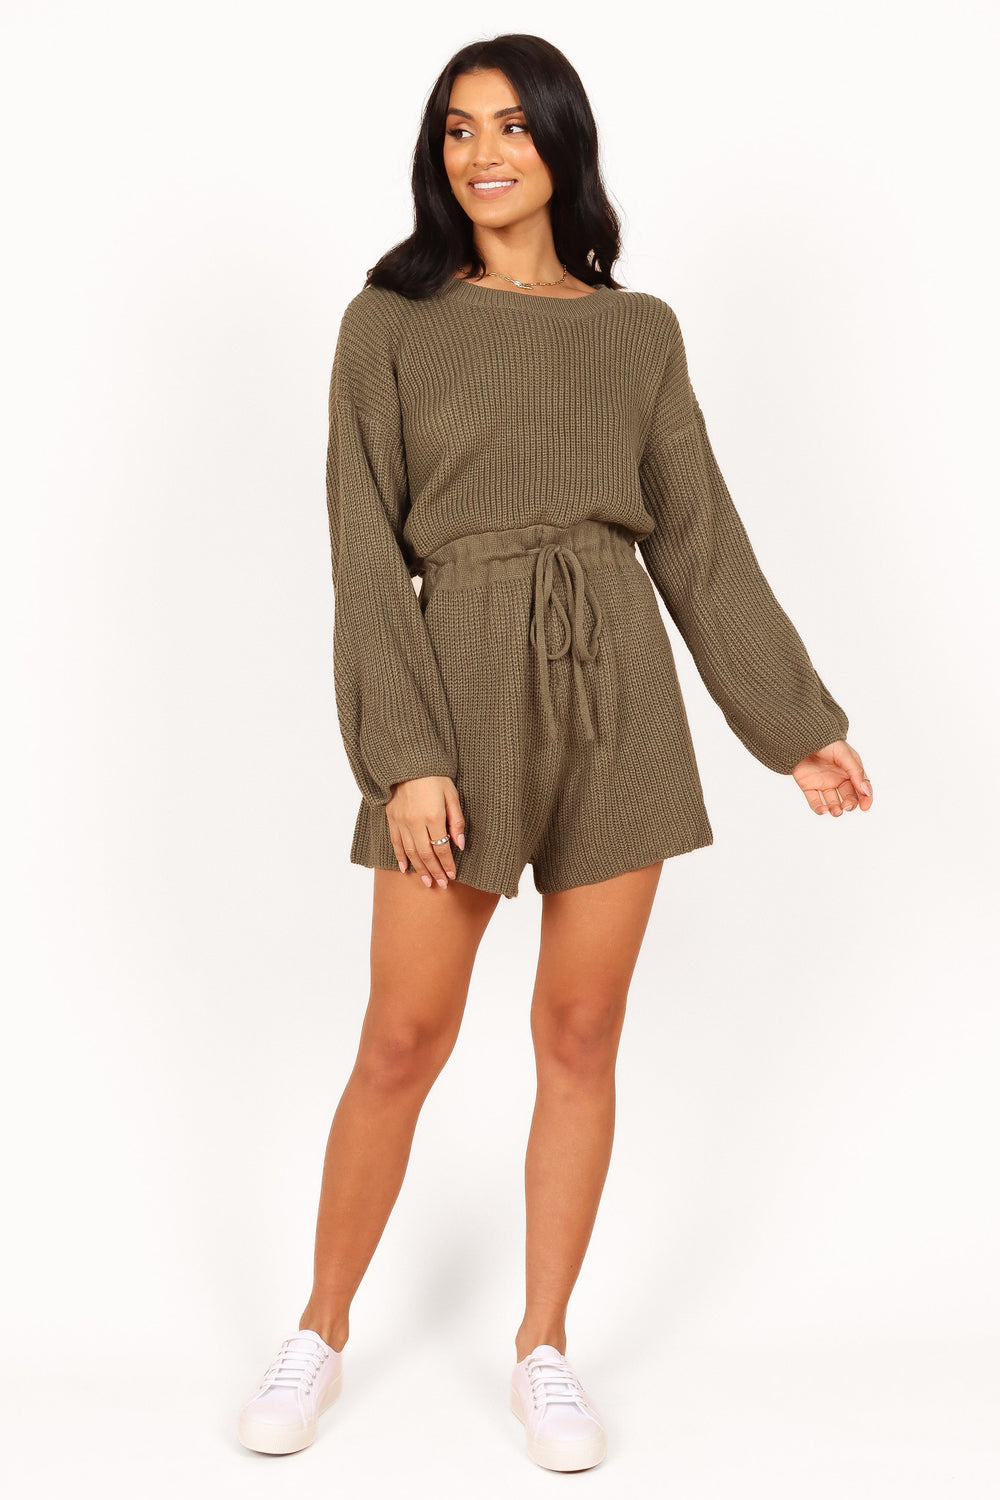 Petal and Pup USA Rompers Sloane Sweater Romper - Olive